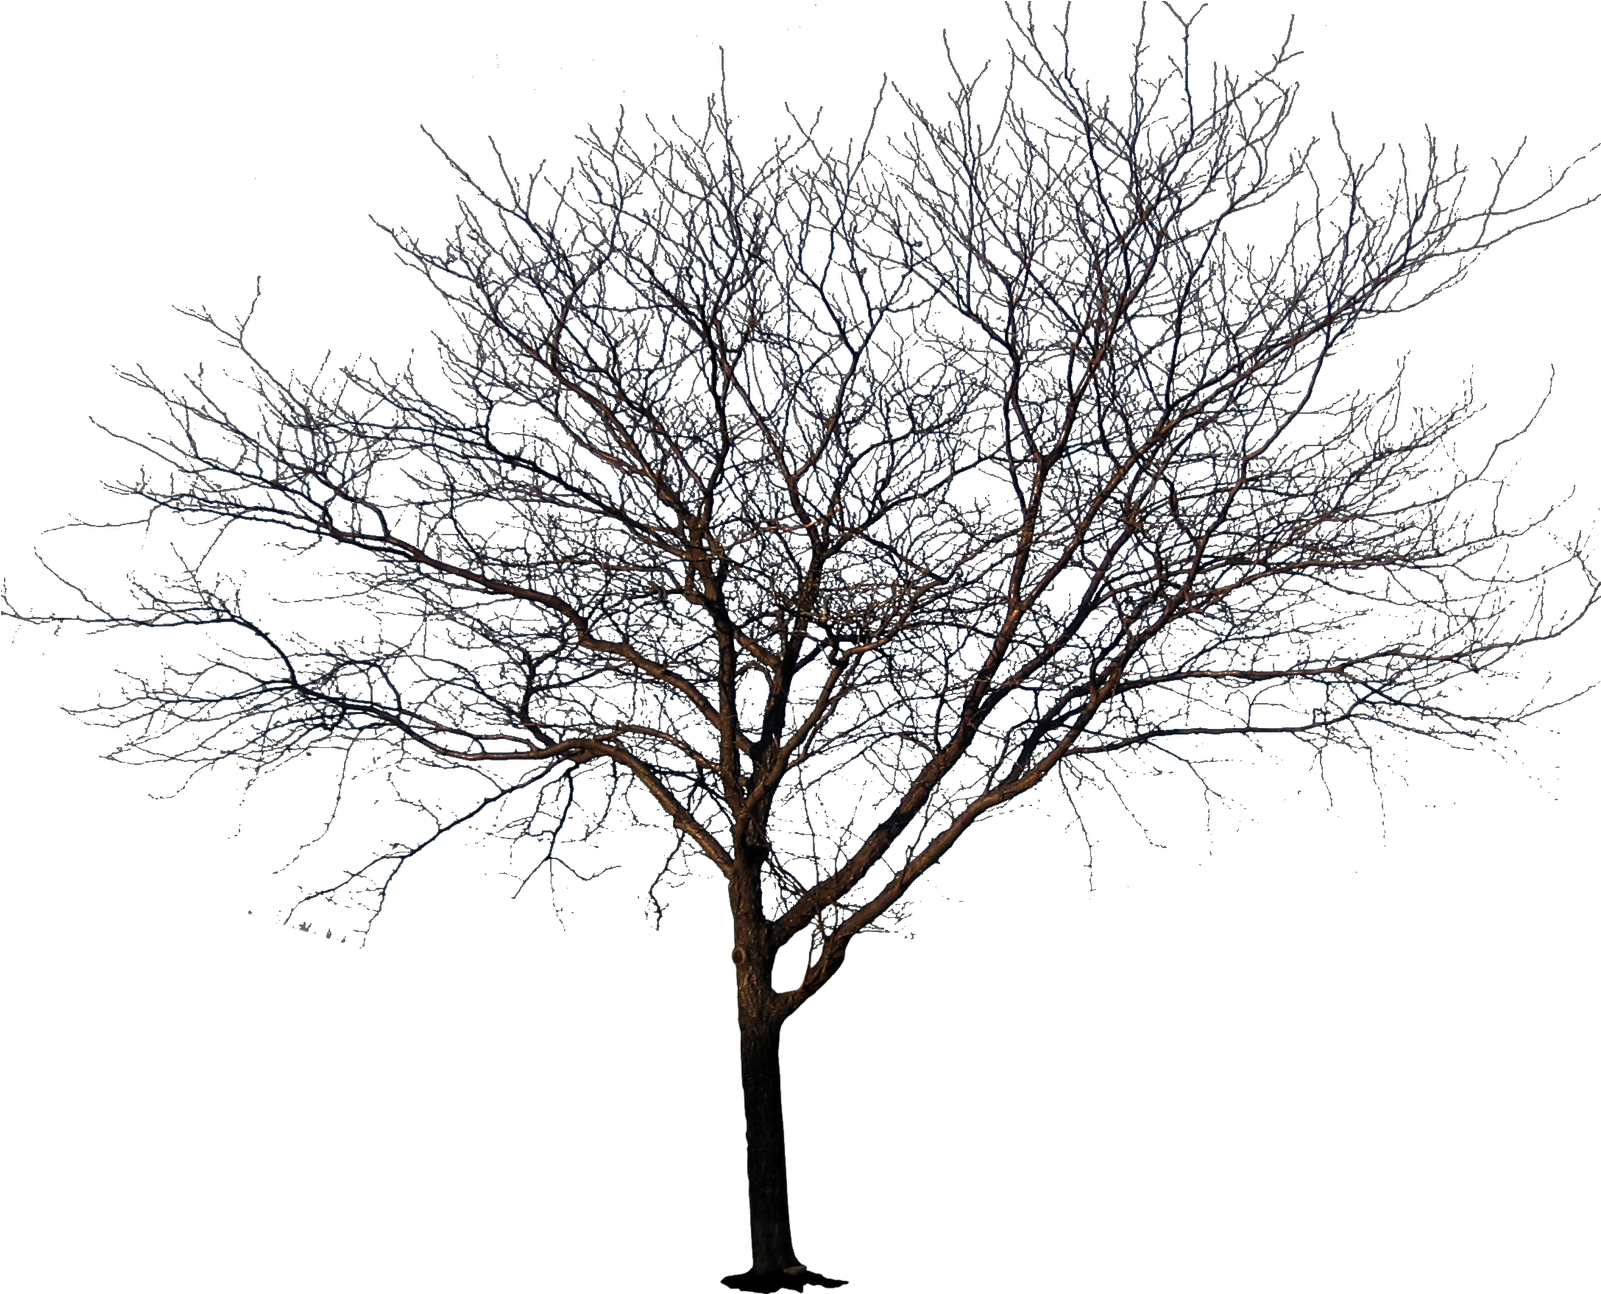 Tree No Leaves Transparent Images